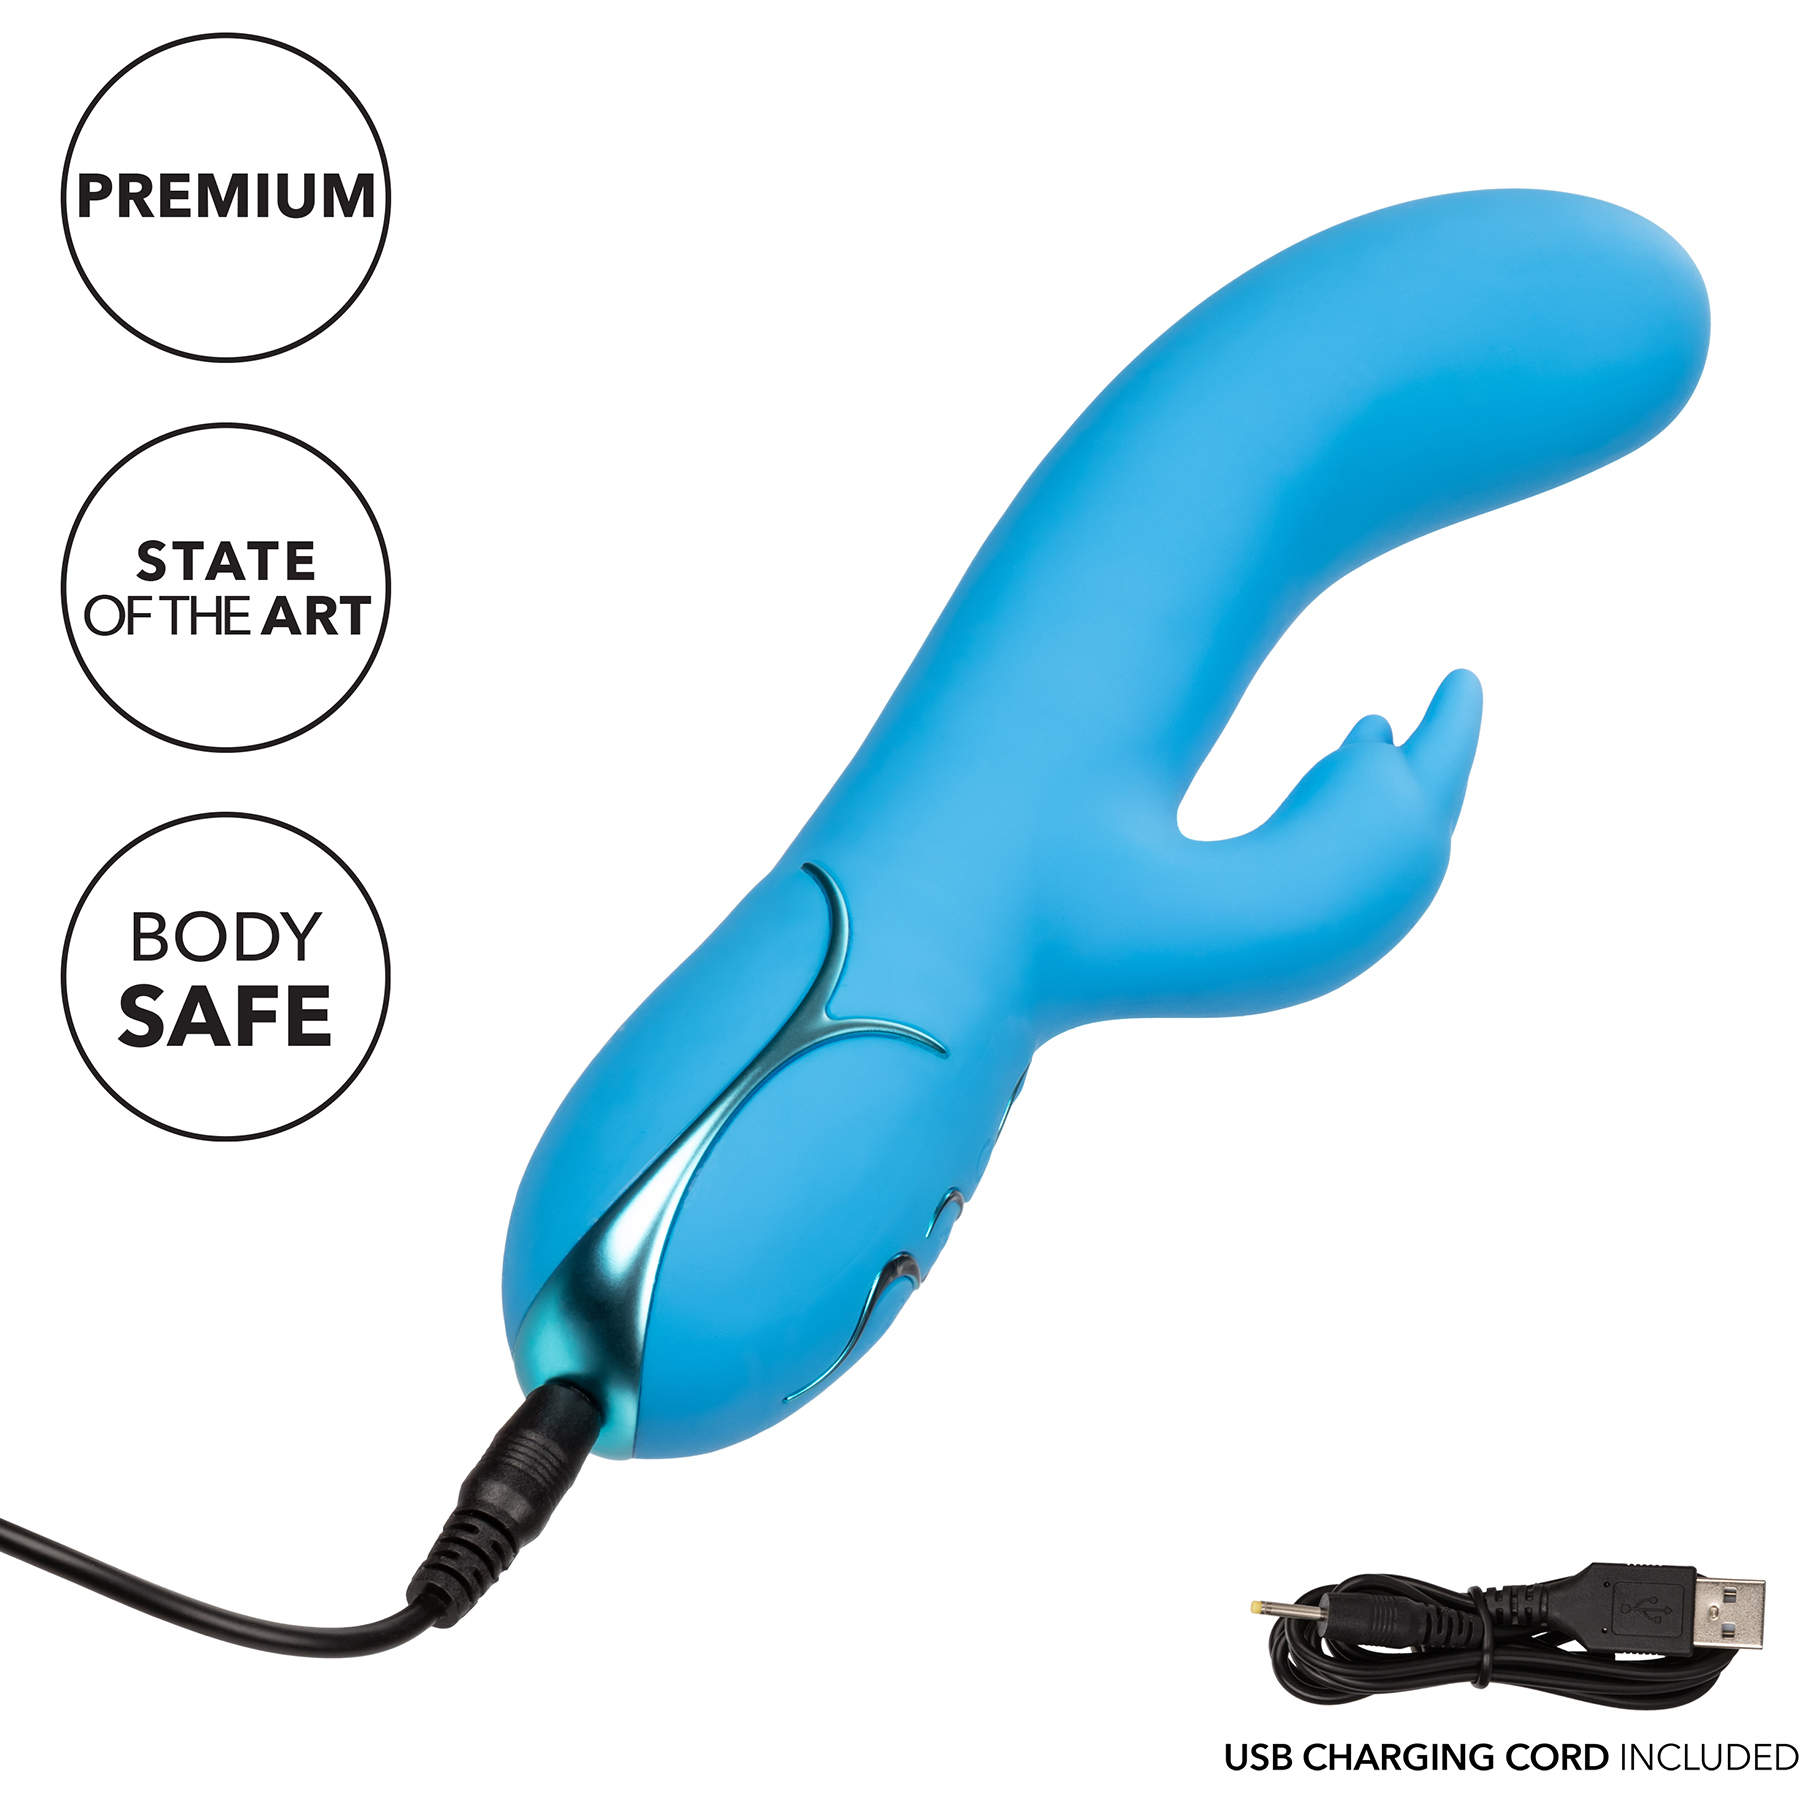  Insatiable G Inflatable G-Bunny Rabbit Style Silicone Vibrator - Charging